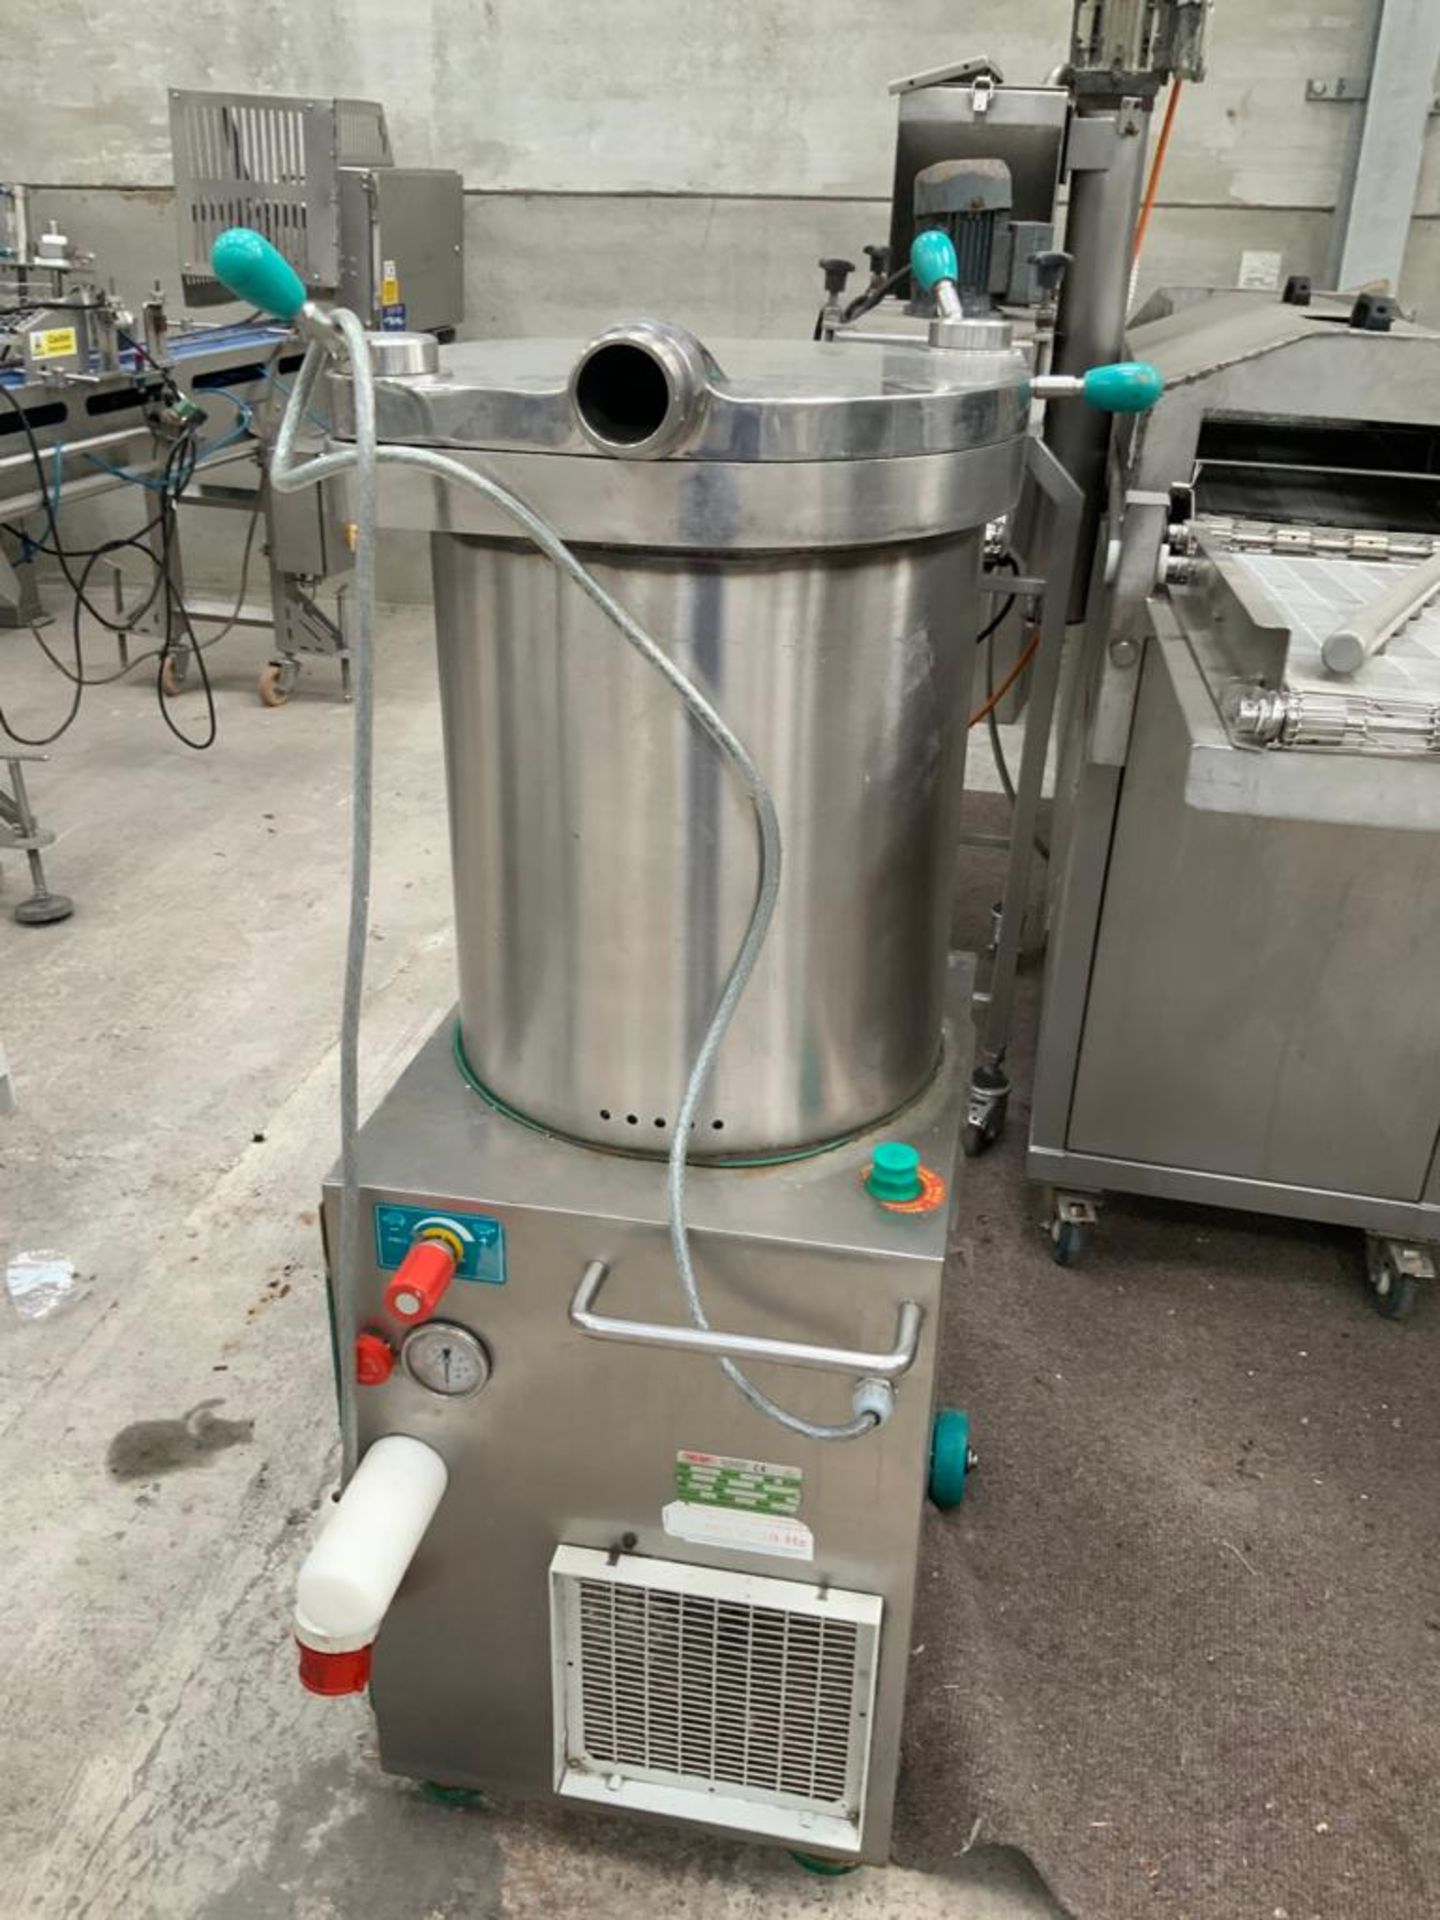 TALSA 52 LITRE SAUSAGE FILLER HYDRAULIC  3 PHASE  STAINLESS STEEL  2013 LOCATION N.IRELAND  SHIPPING - Image 9 of 9